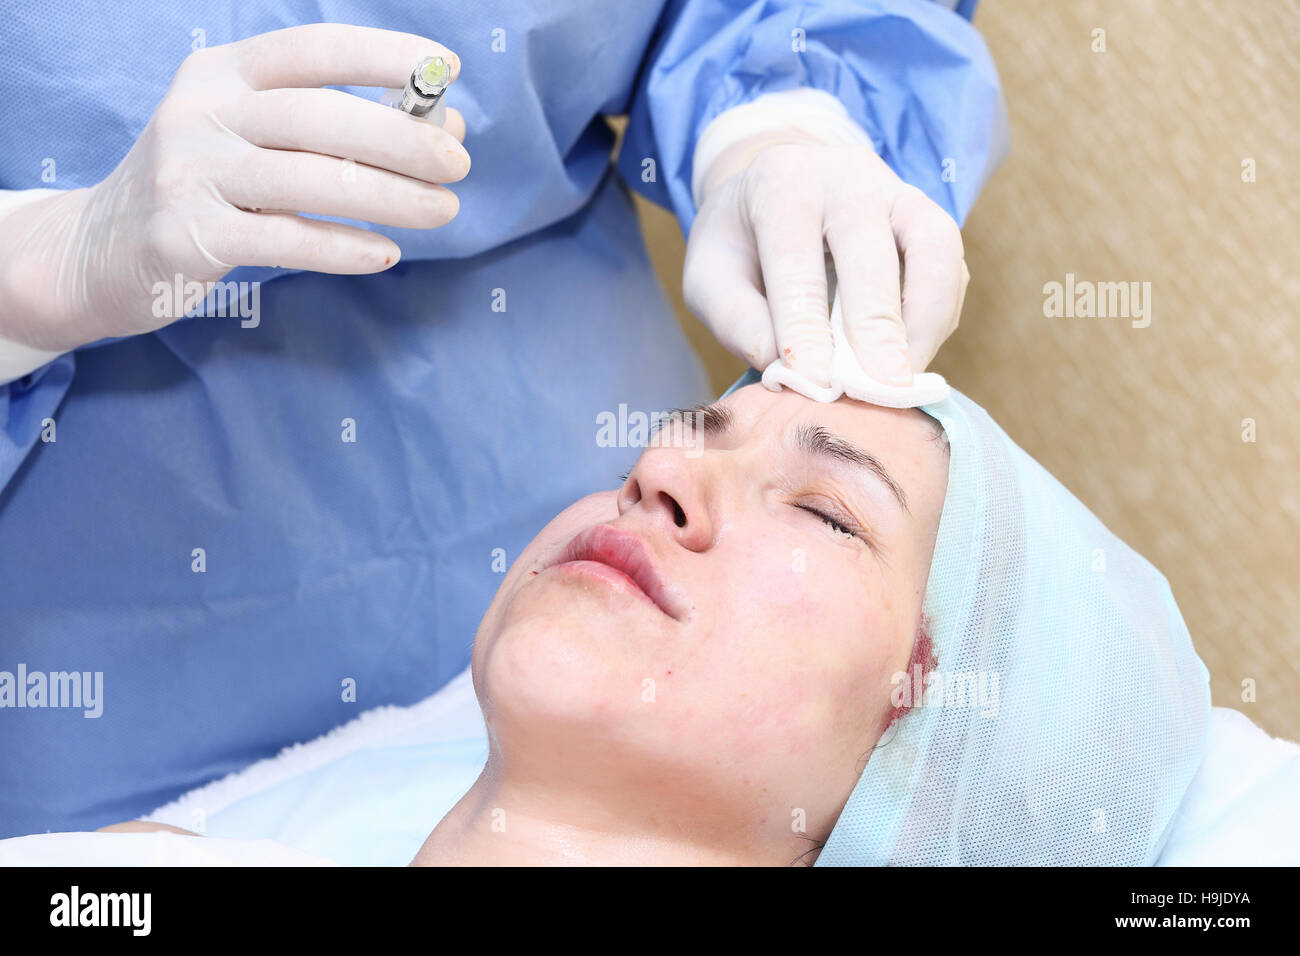 Bio-revitalization with hyaluronic acid treatment of mimic wrinkles Stock Photo